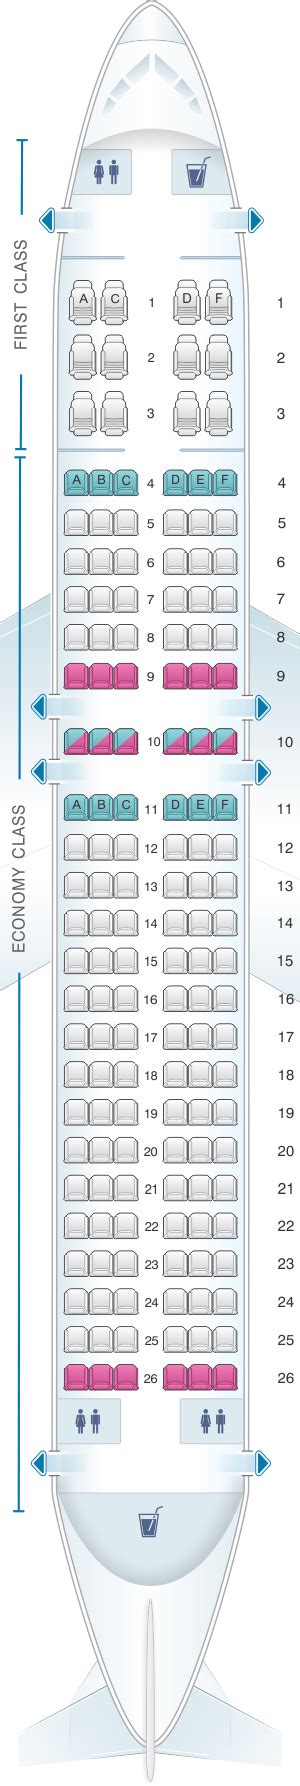 Airbus A319 Seat Map American